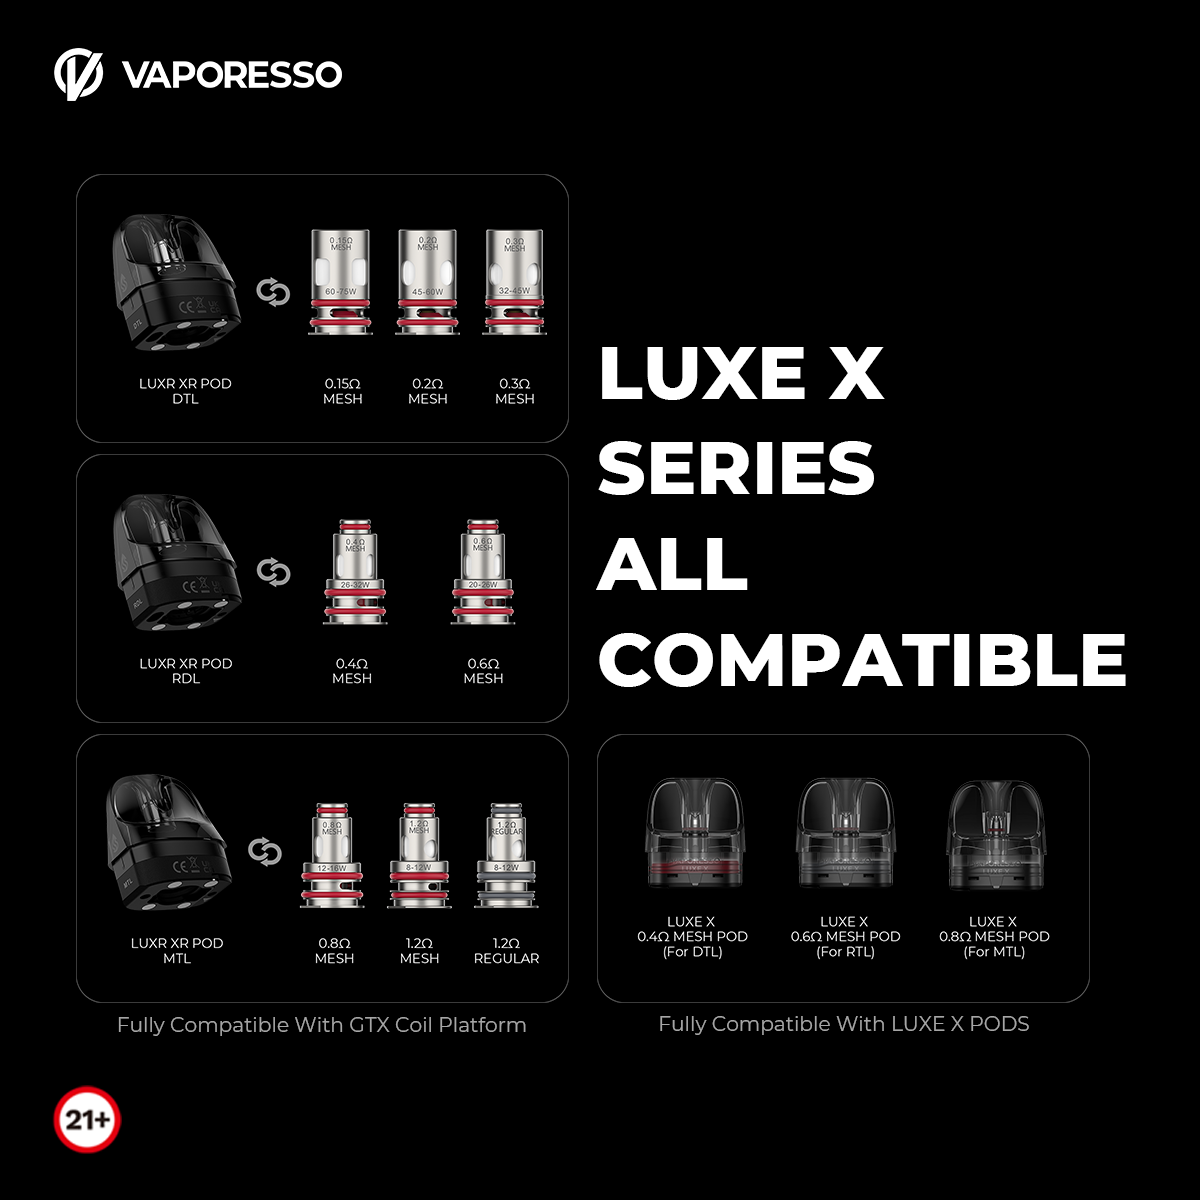 VAPORESSO LUXE XR MAX: Striking a Balance Between Battery Life and Size -  Vaping Post